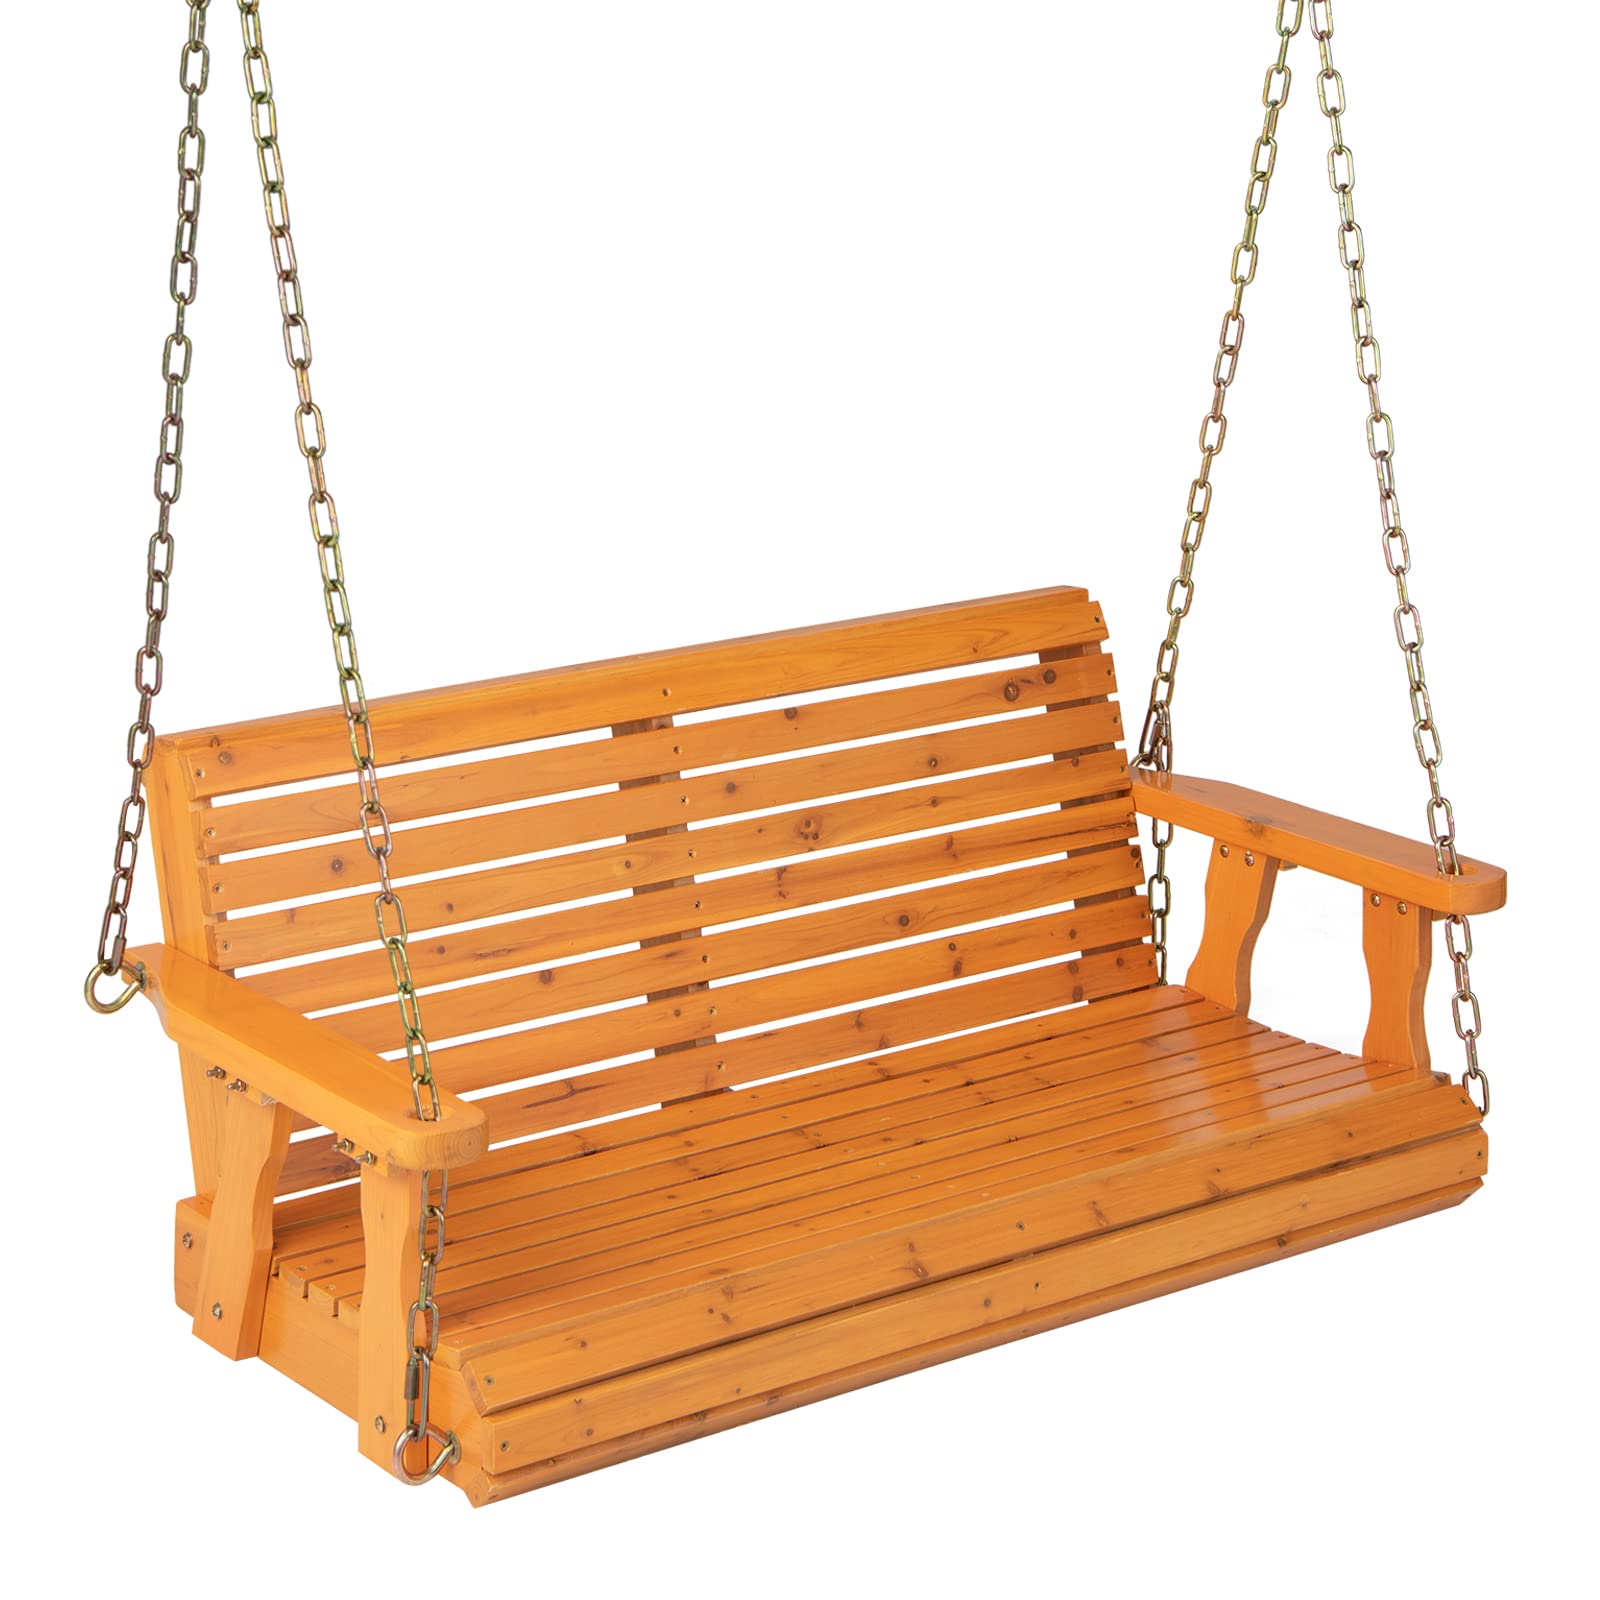 Giantex Wooden Porch Swing 2 Seat - Outdoor Swinging Chairs